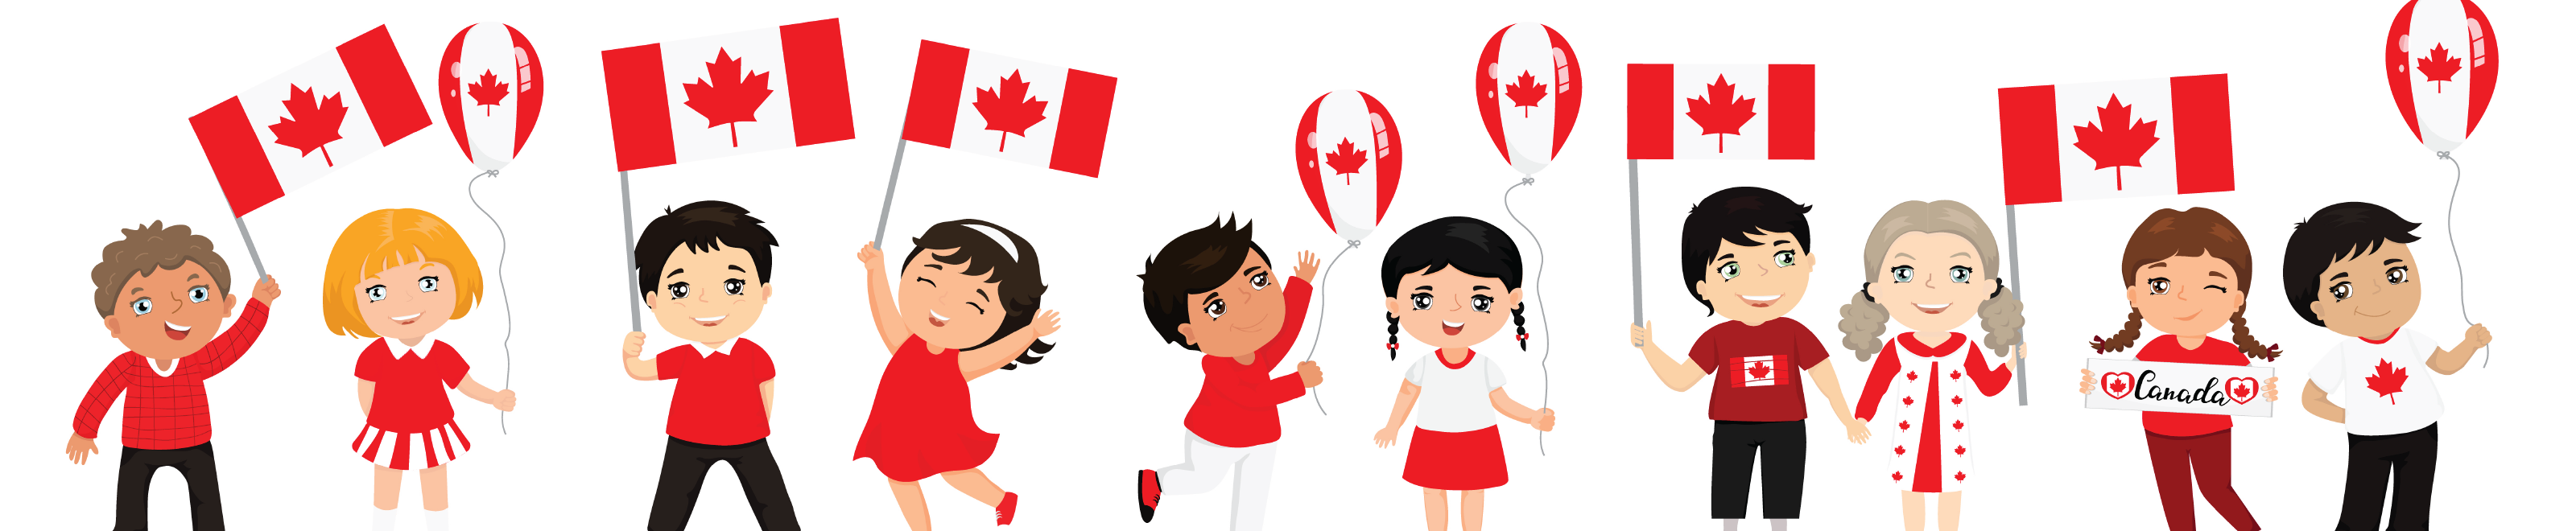 Illustrated children representing diversity and holding Canadian flags.